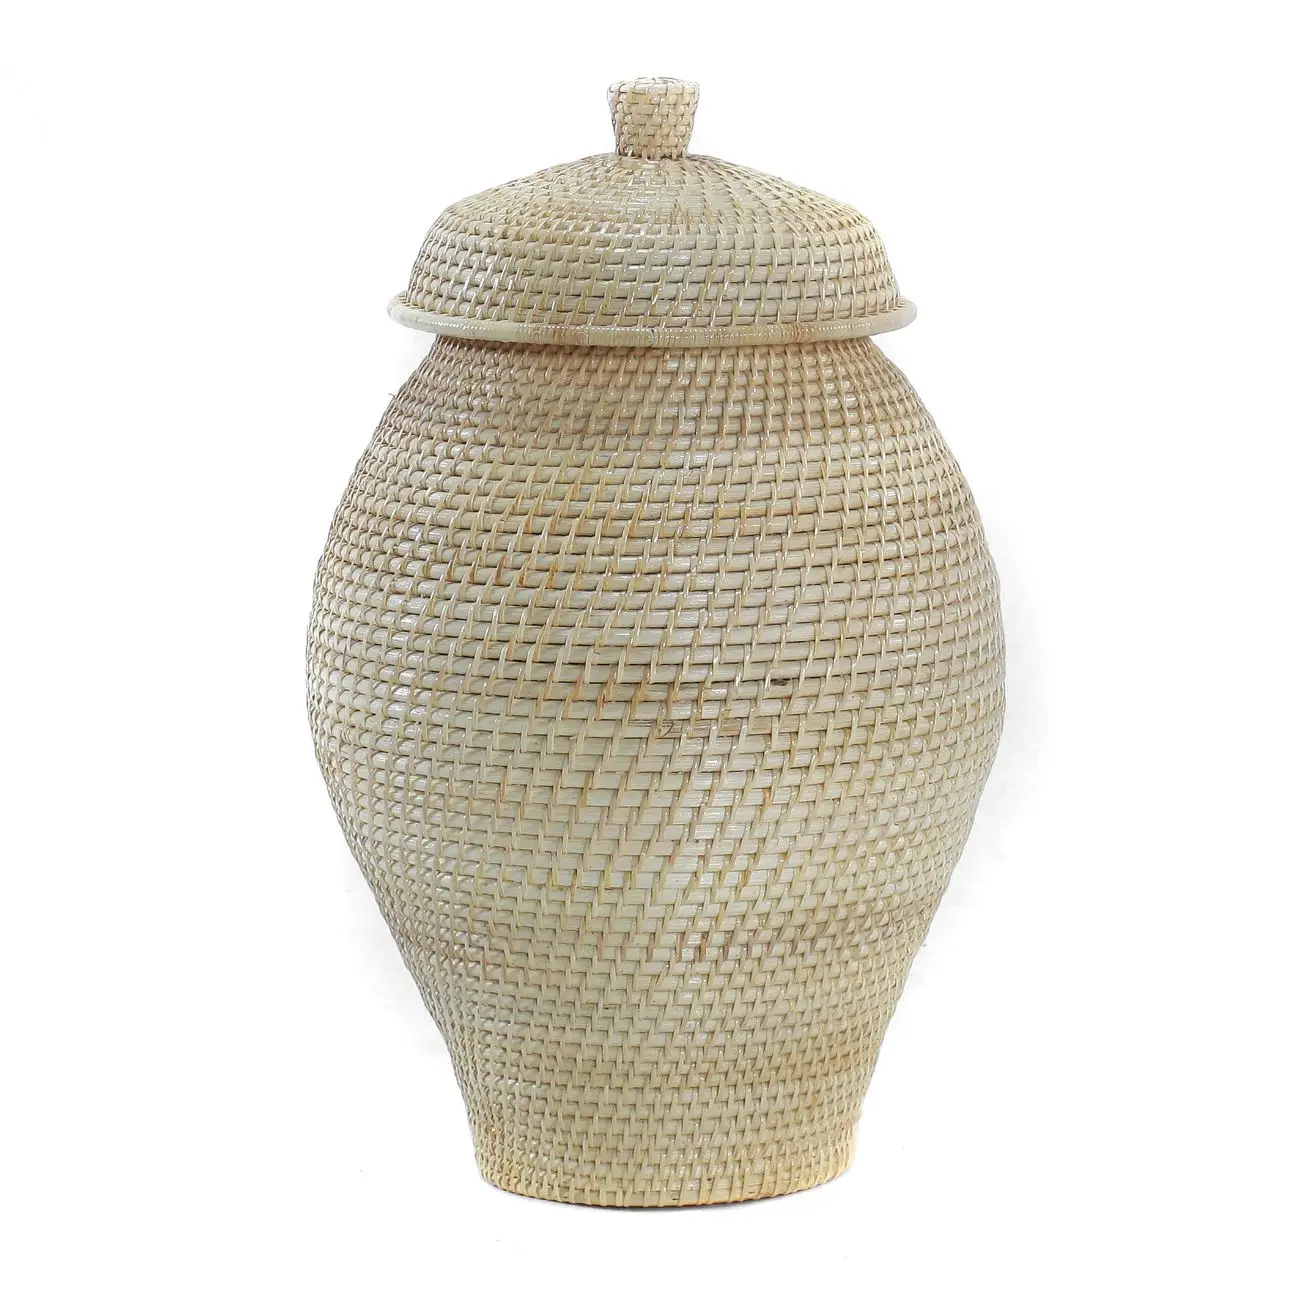 Wood Flower Vase with lid Living Room Interior Decorative Wooden vase made of rattan core weaving Fabric Lining Inside